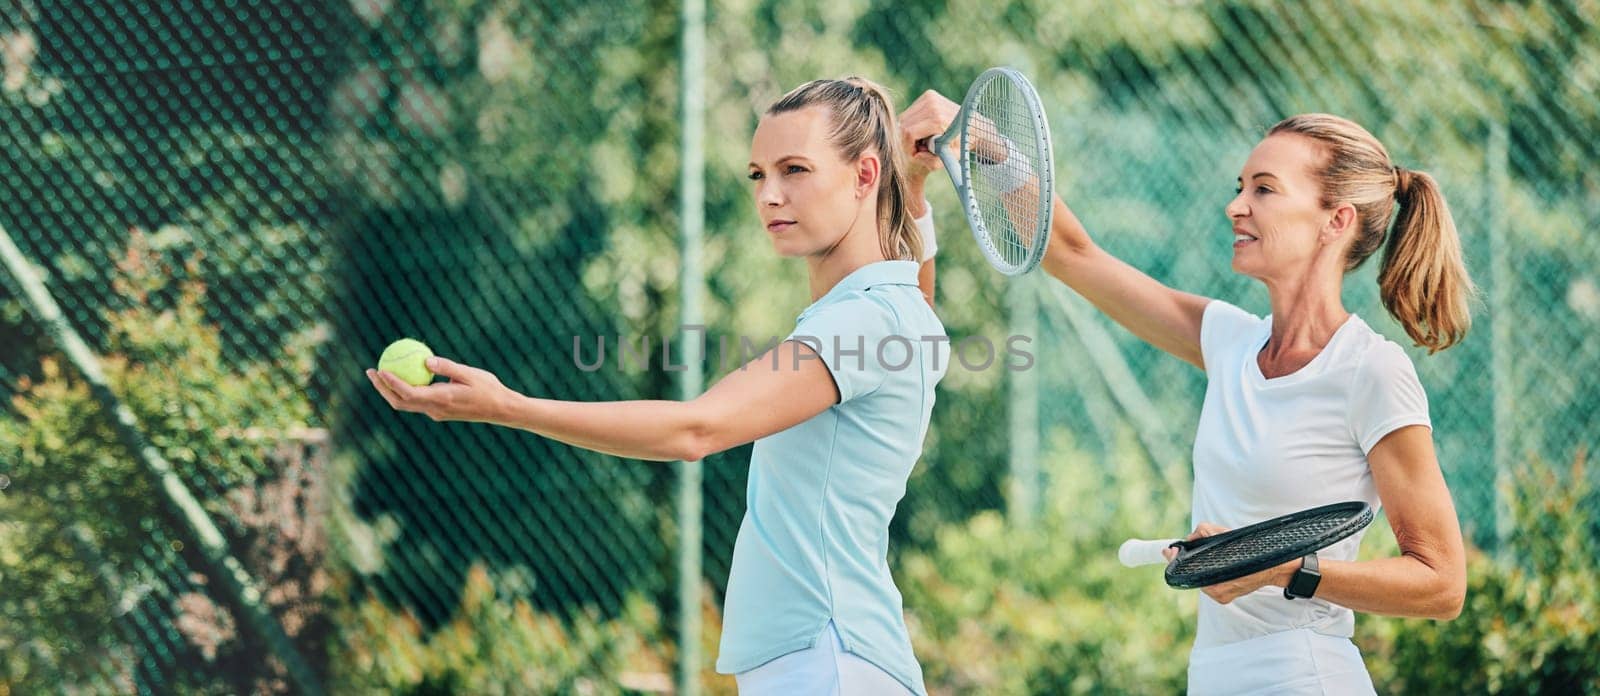 Tennis training, sport and women together on outdoor turf, instructor or coach with fitness, motivation and help. Exercise, sports lesson and athlete workout, teaching and learning skill on court by YuriArcurs